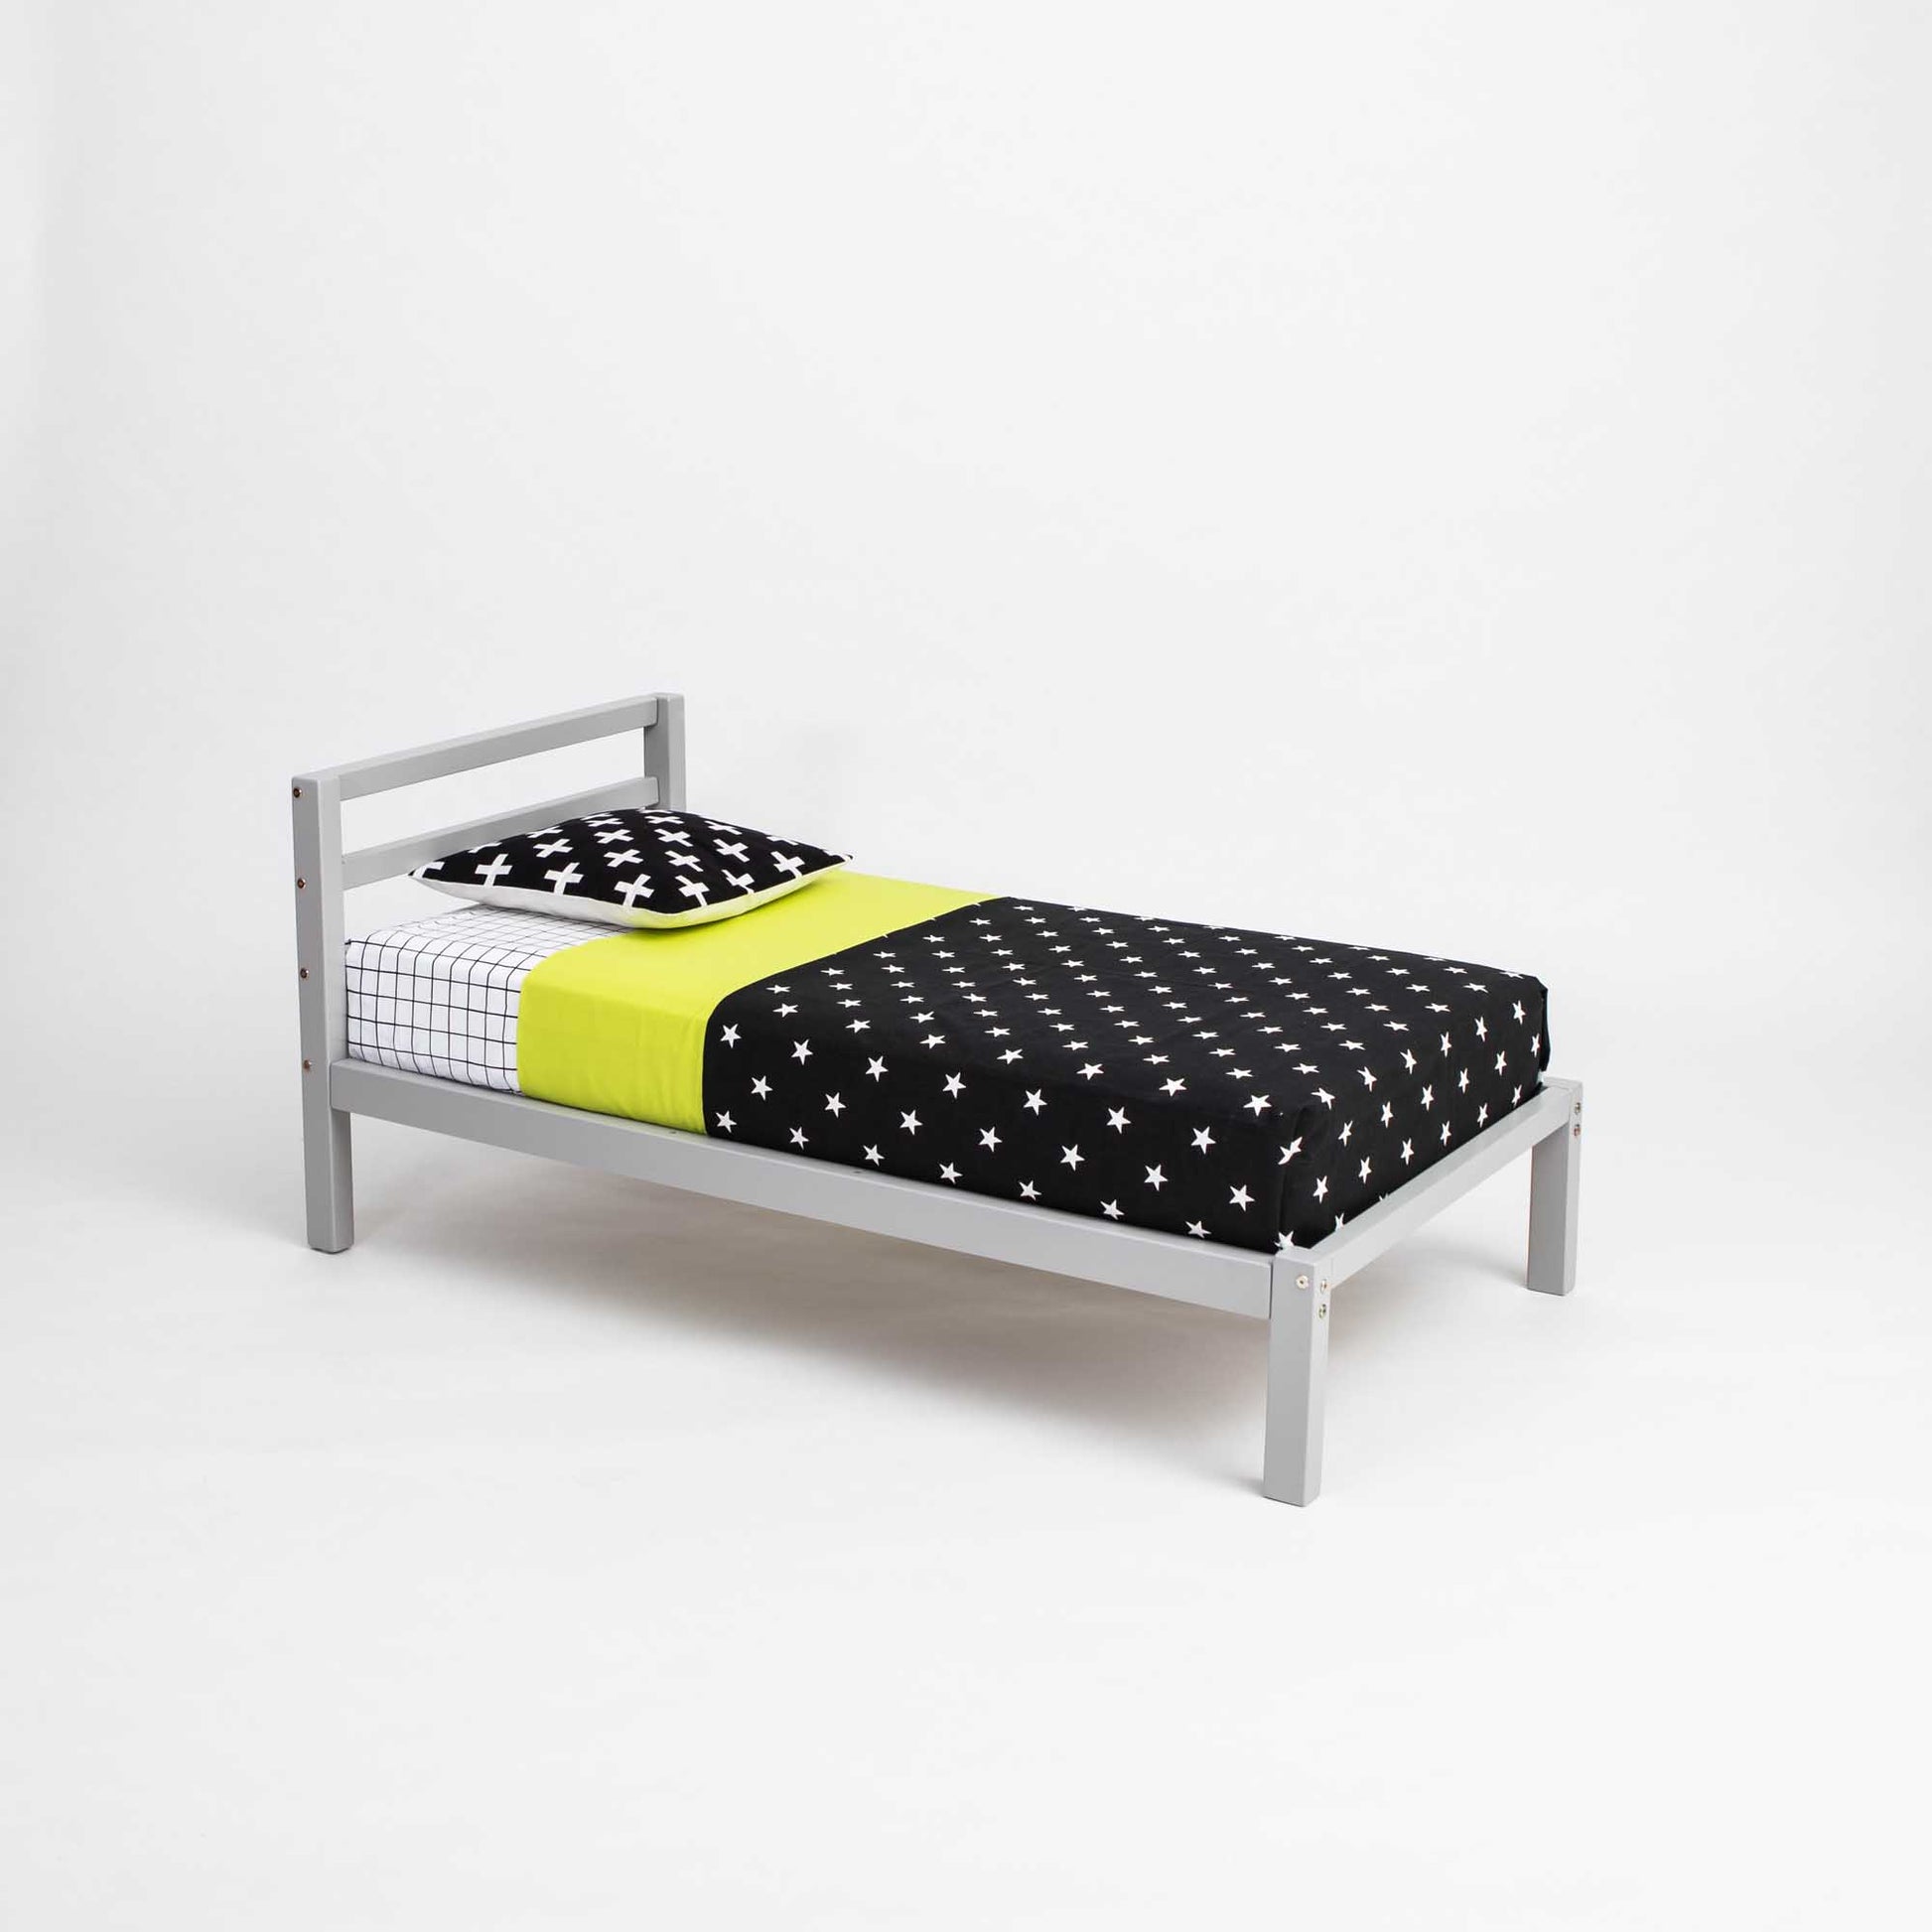 A Sweet Home From Wood convertible bed featuring a 2-in-1 transformable kids' bed with a horizontal rail headboard design, perfect for growing with your child. The stylish grey frame complements the charming polka dot sheets.